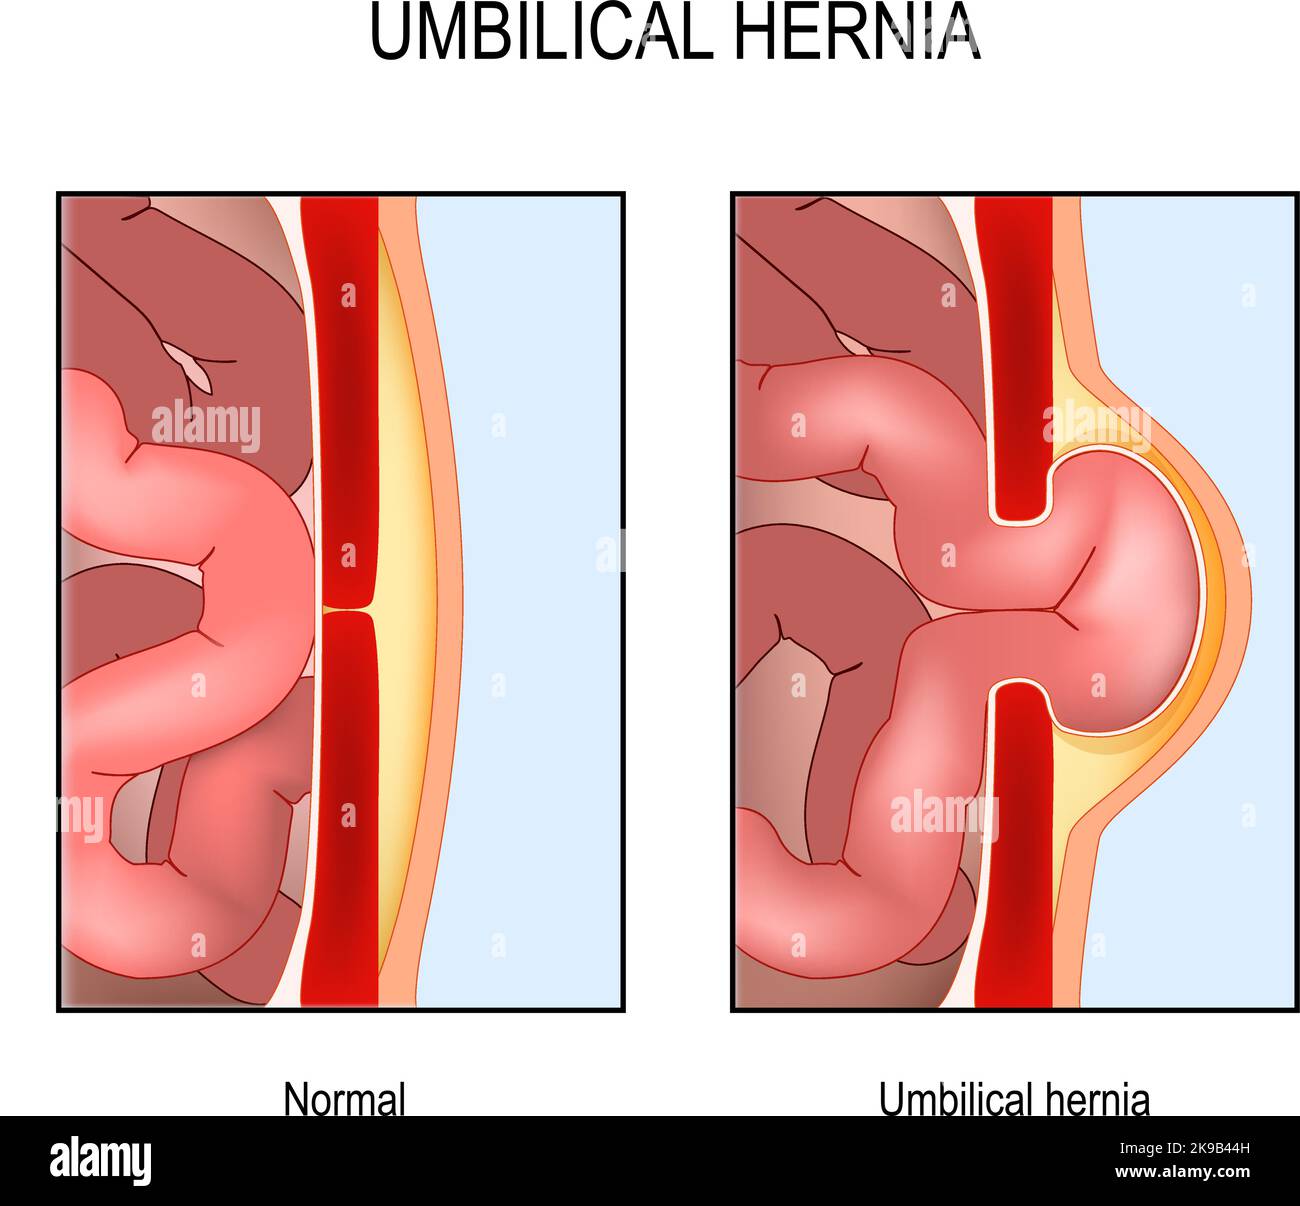 Umbilical hernia. Cross section of abdomen with small intestine, muscle and abdominal wall. Normal human's belly and muscle rupture with hernial sac. Stock Vector